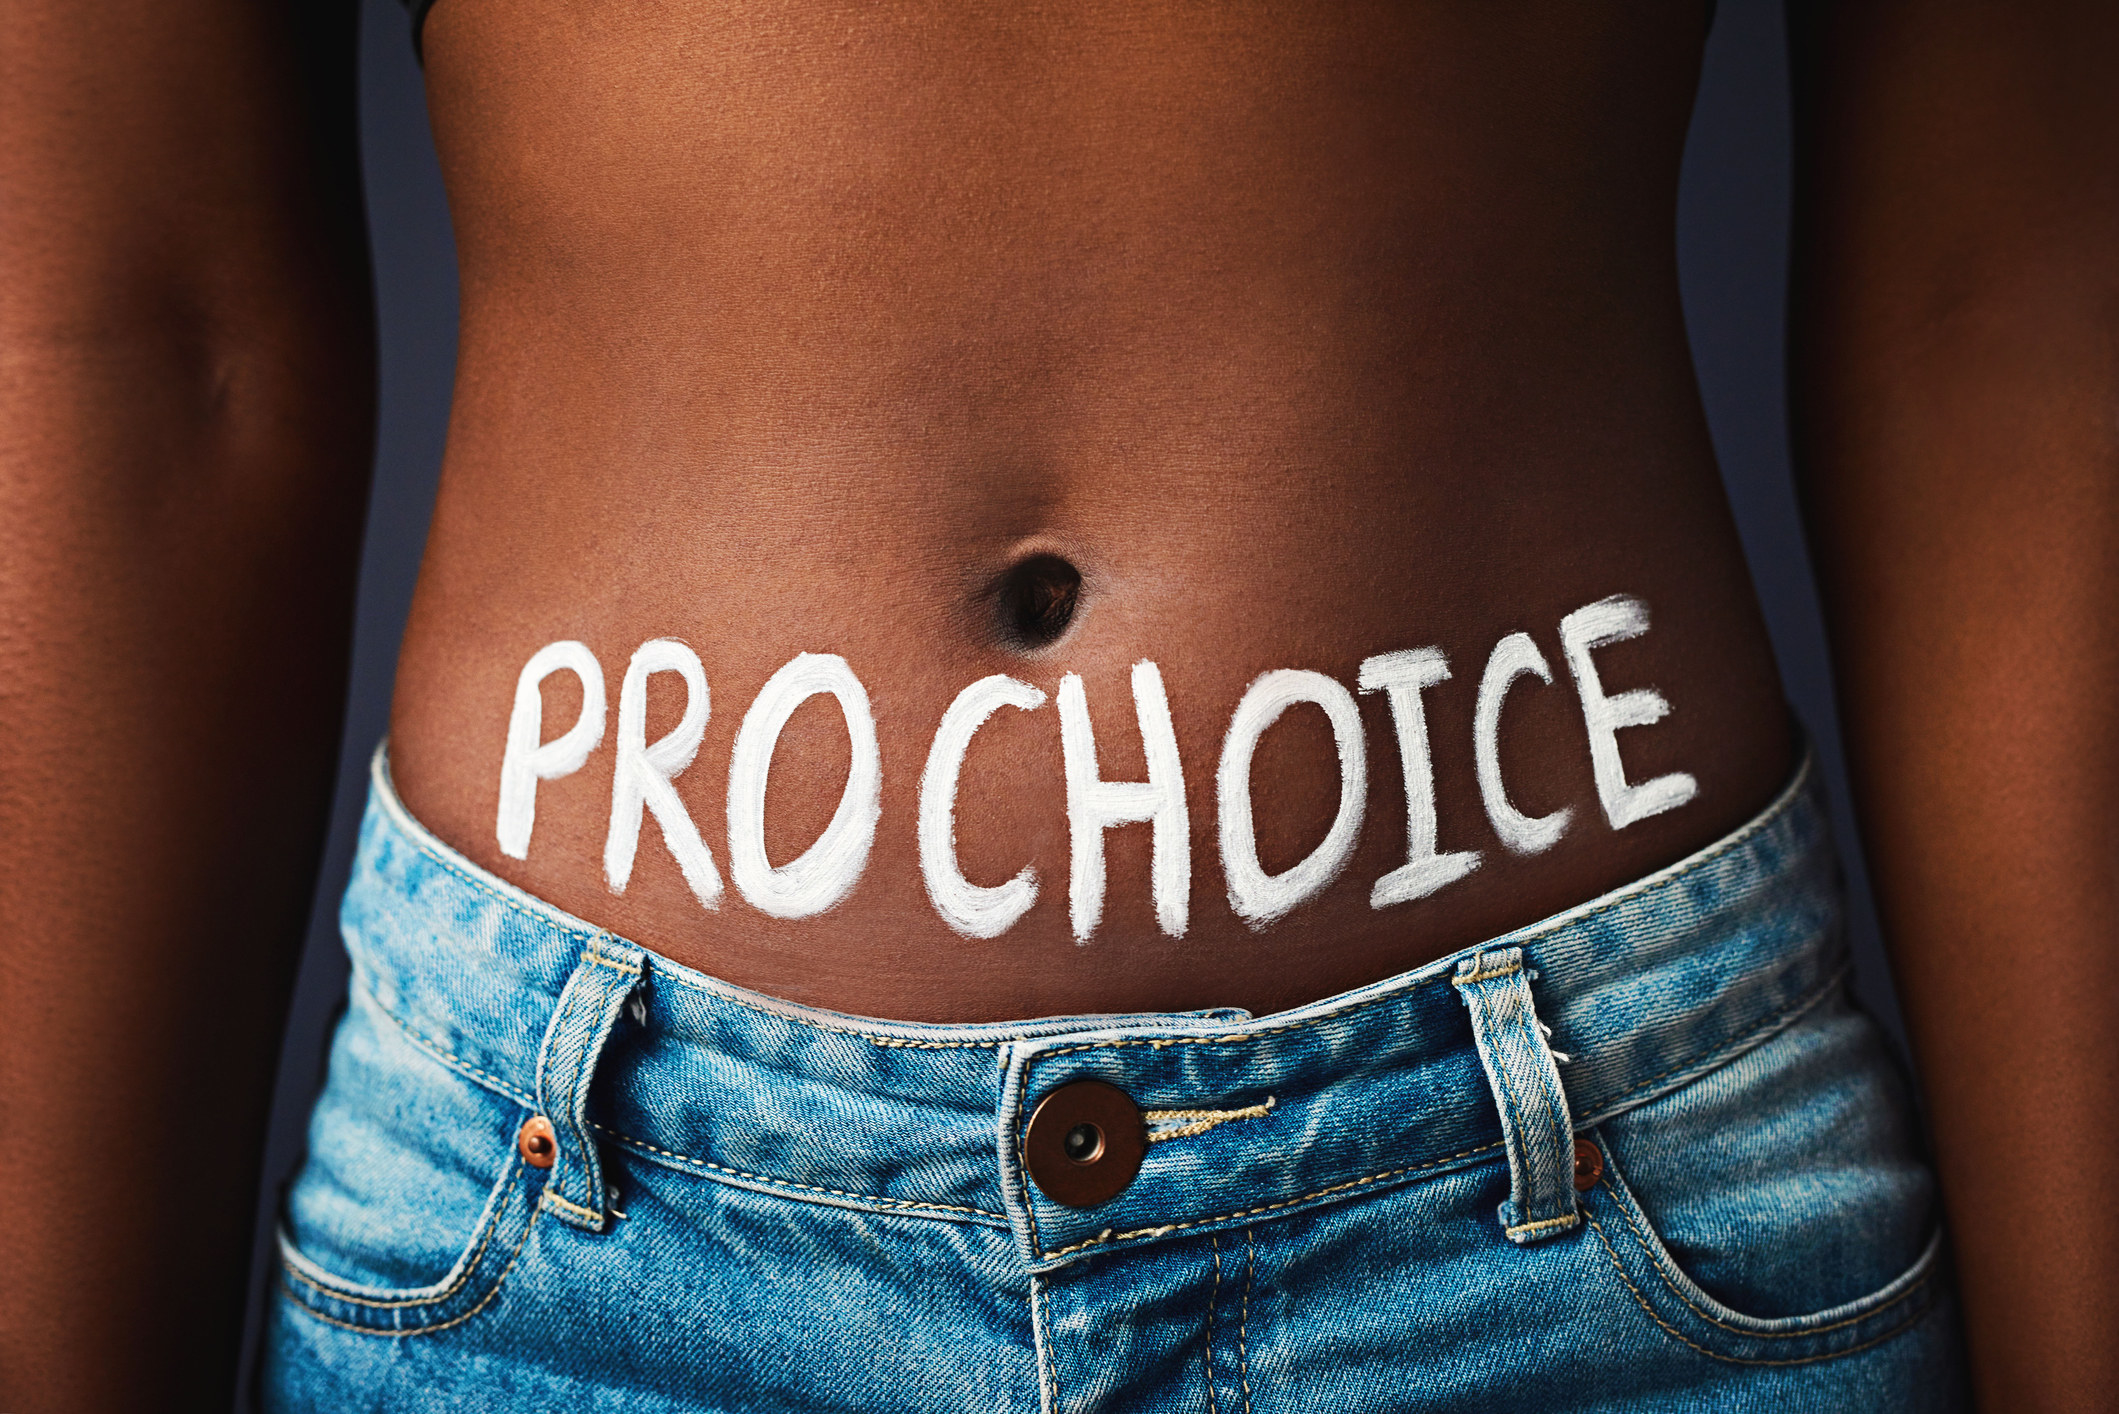 Pro choice painted on someone&#x27;s stomach